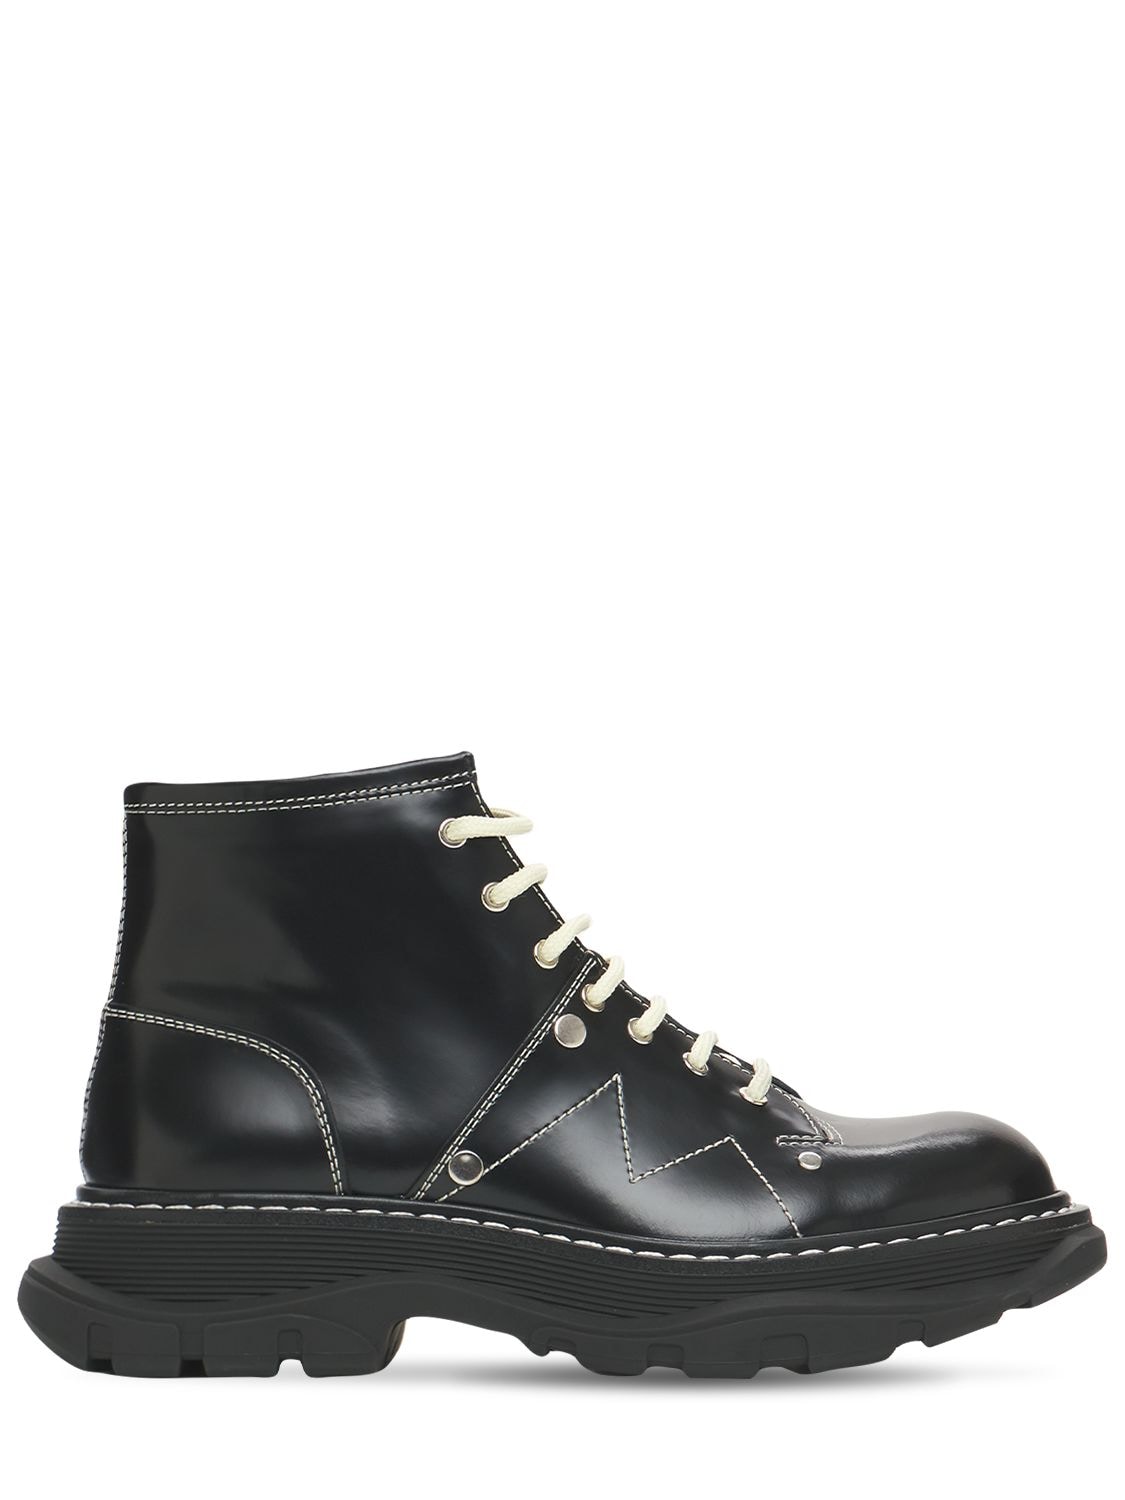 40mm Tread Brushed Leather Combat Boots